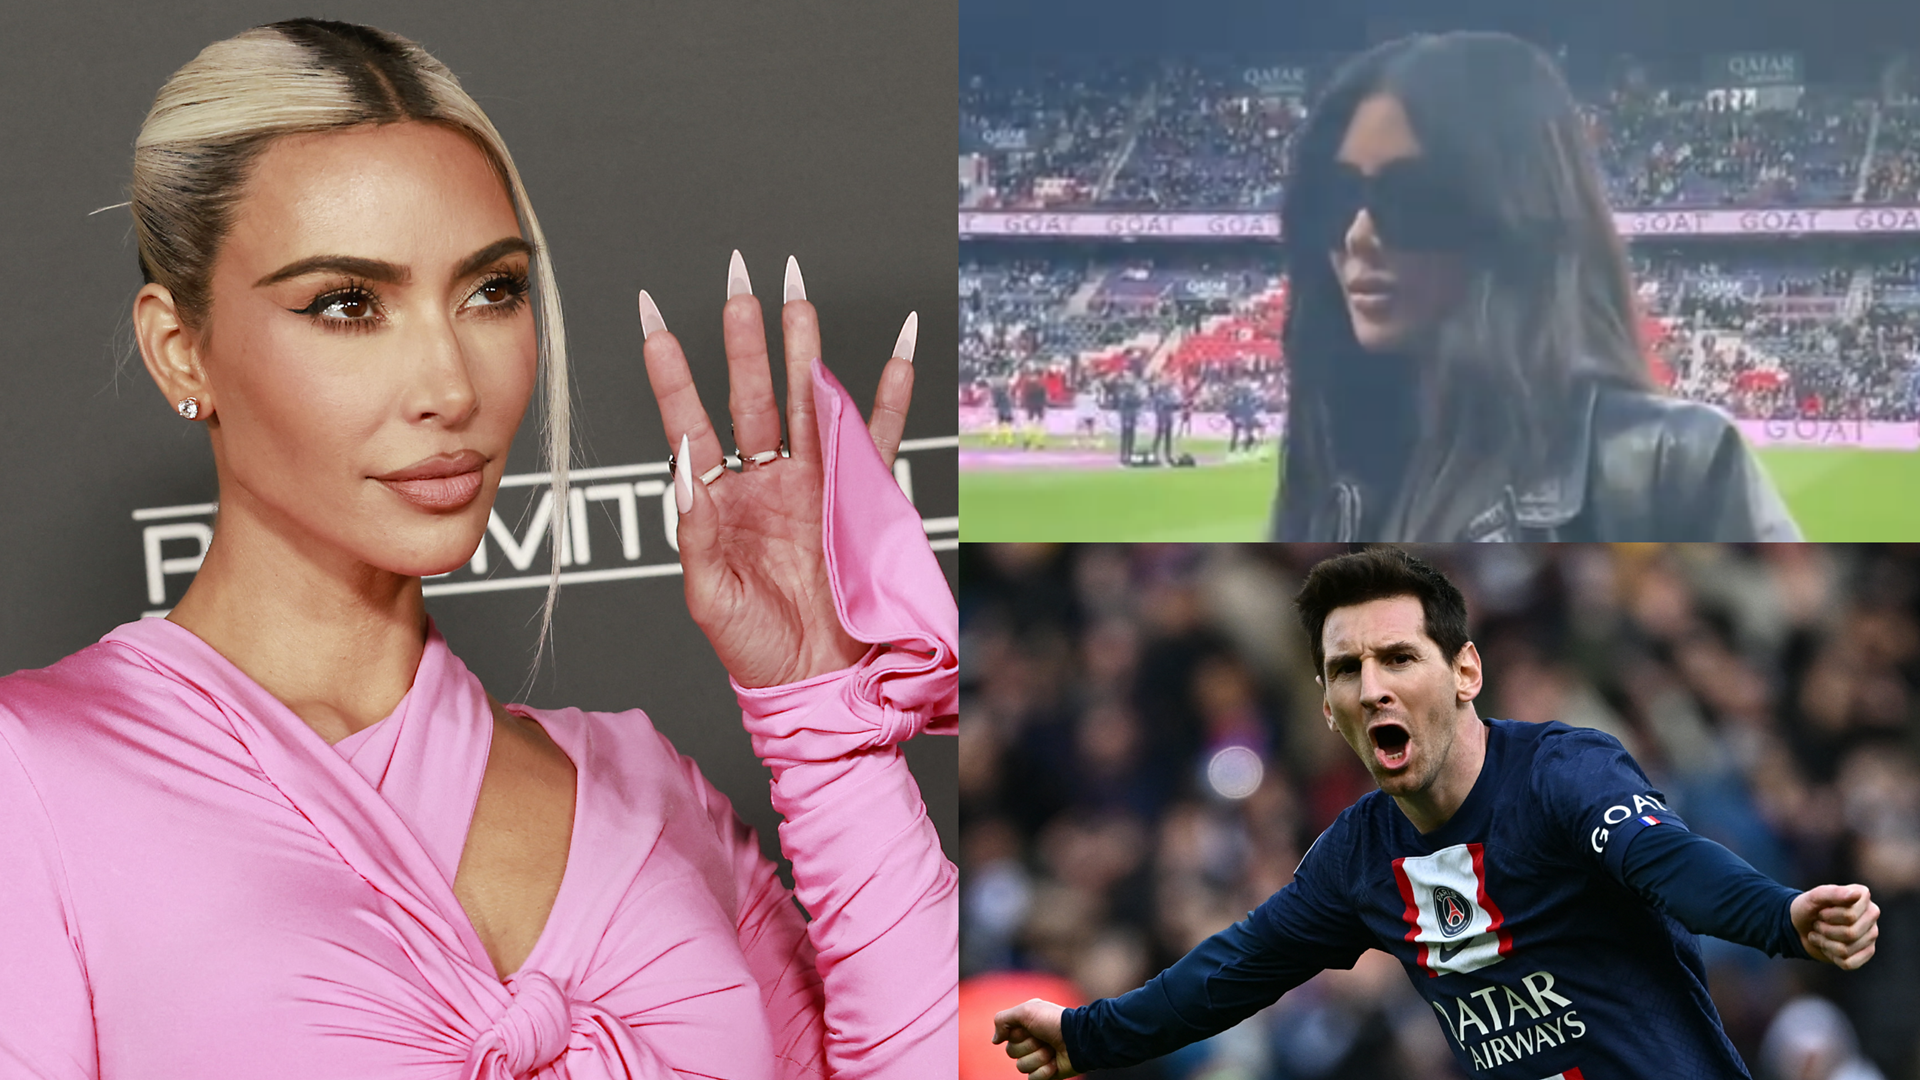 WATCH: Kim Kardashian takes in the Lionel Messi show at PSG after previously paying a visit to Arsenal